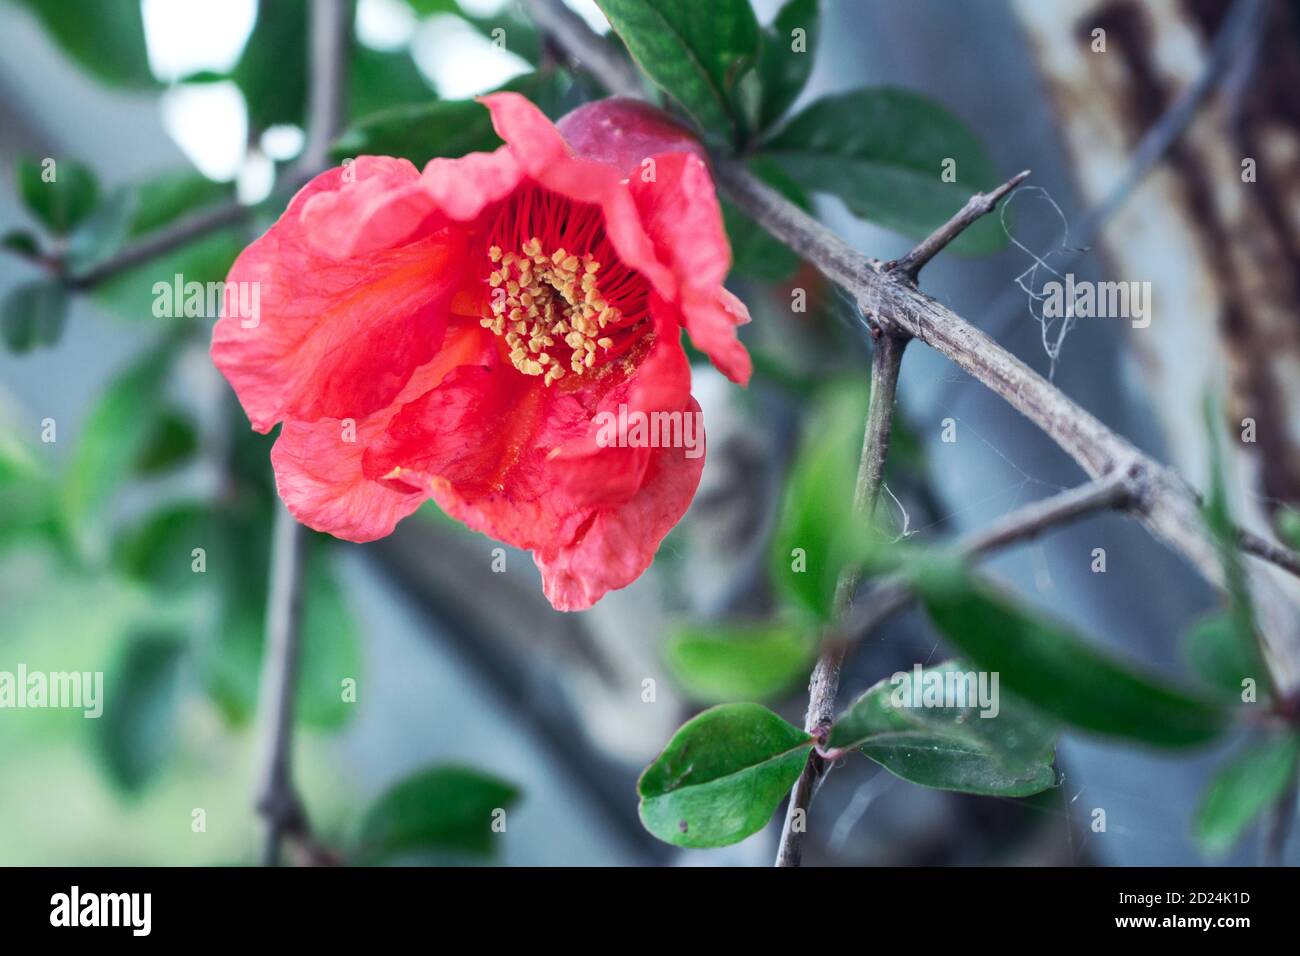 Detail on a newly blossomed red pomegranate flower Stock Photo